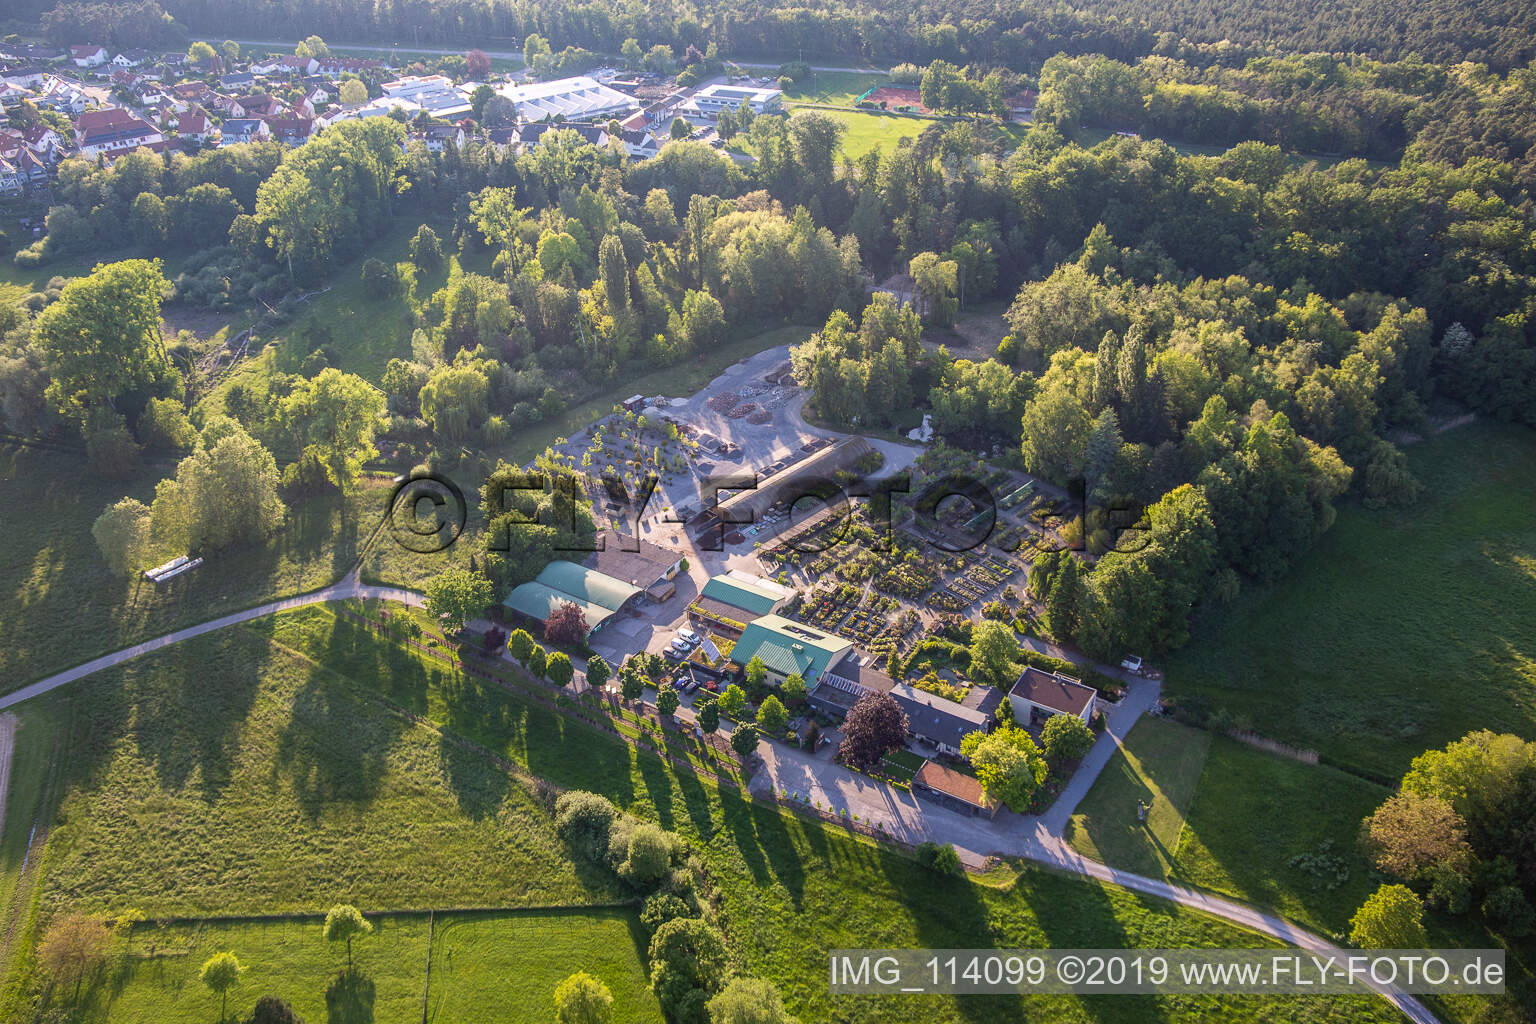 Bienwald tree nursery / Greentec in Berg in the state Rhineland-Palatinate, Germany from the drone perspective